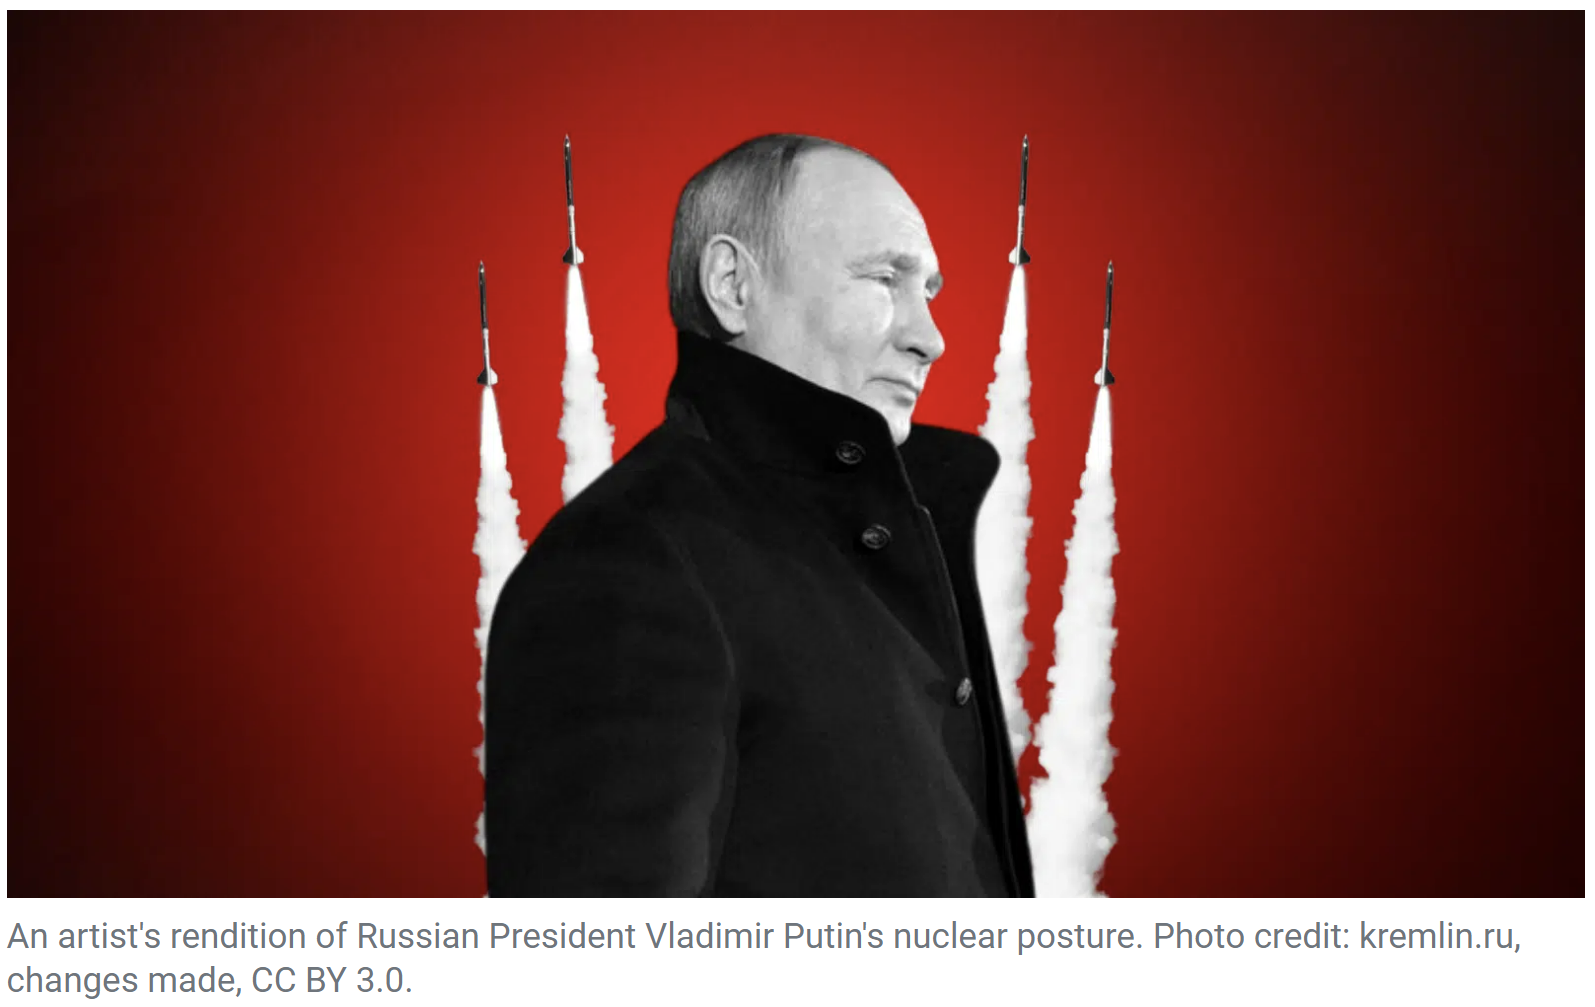 Will Putin go nuclear? An updated timeline of expert comments from the  Bulletin of the Atomic Scientists - NukeWatch NM